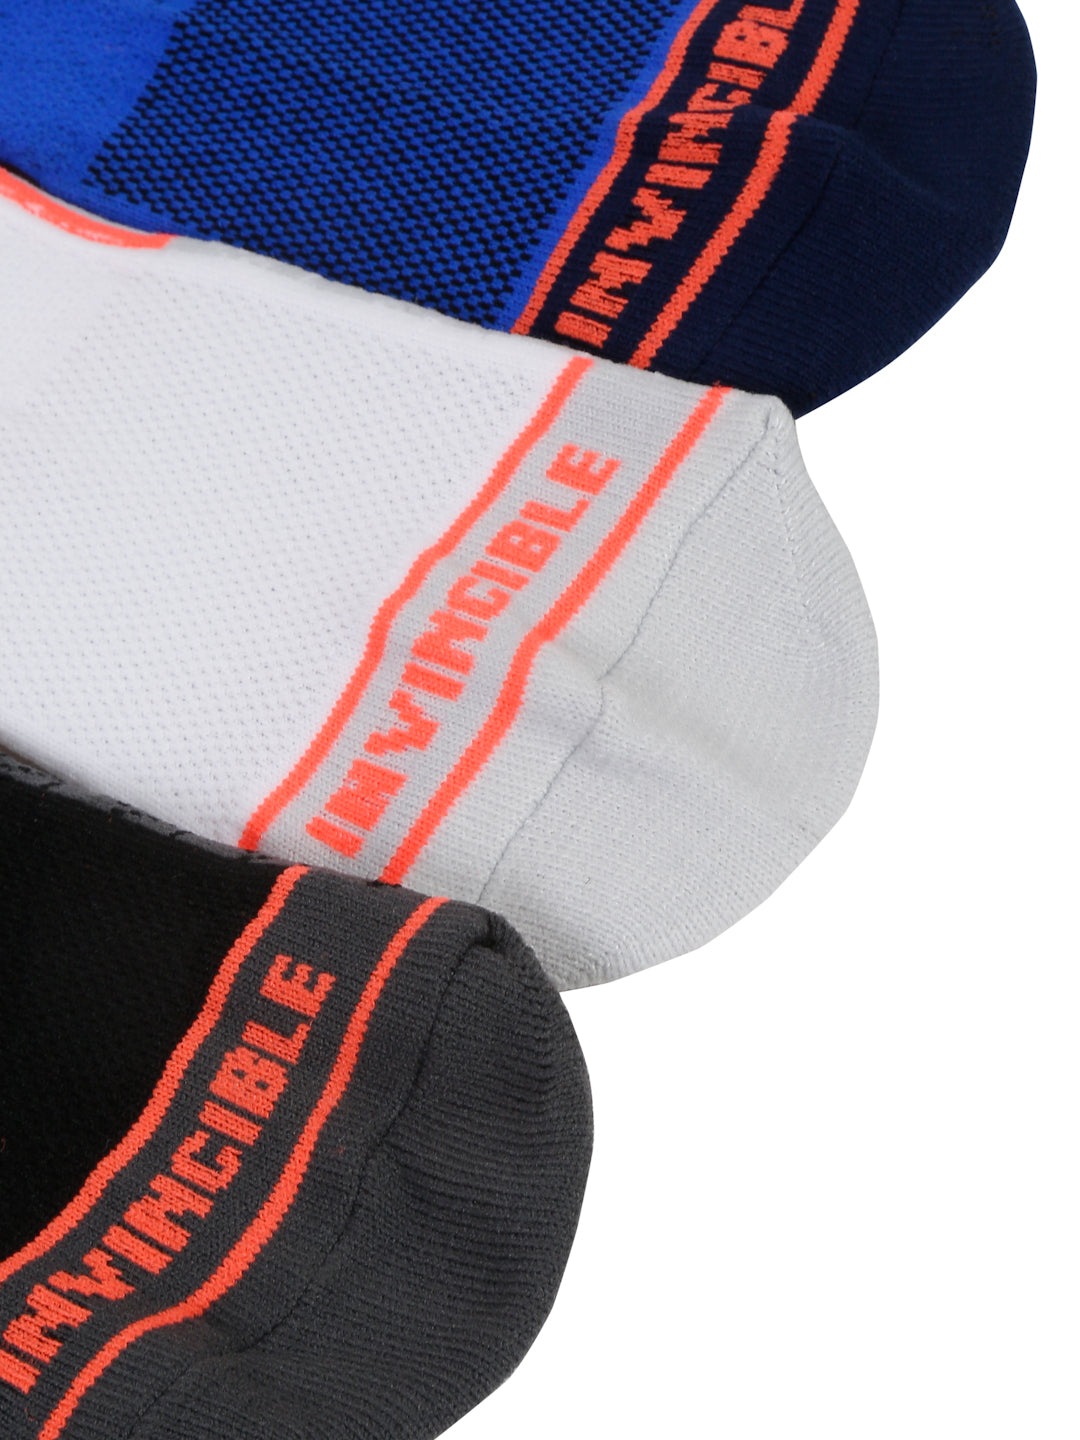 Invincible Ankle Length Socks Set of 3 Pairs